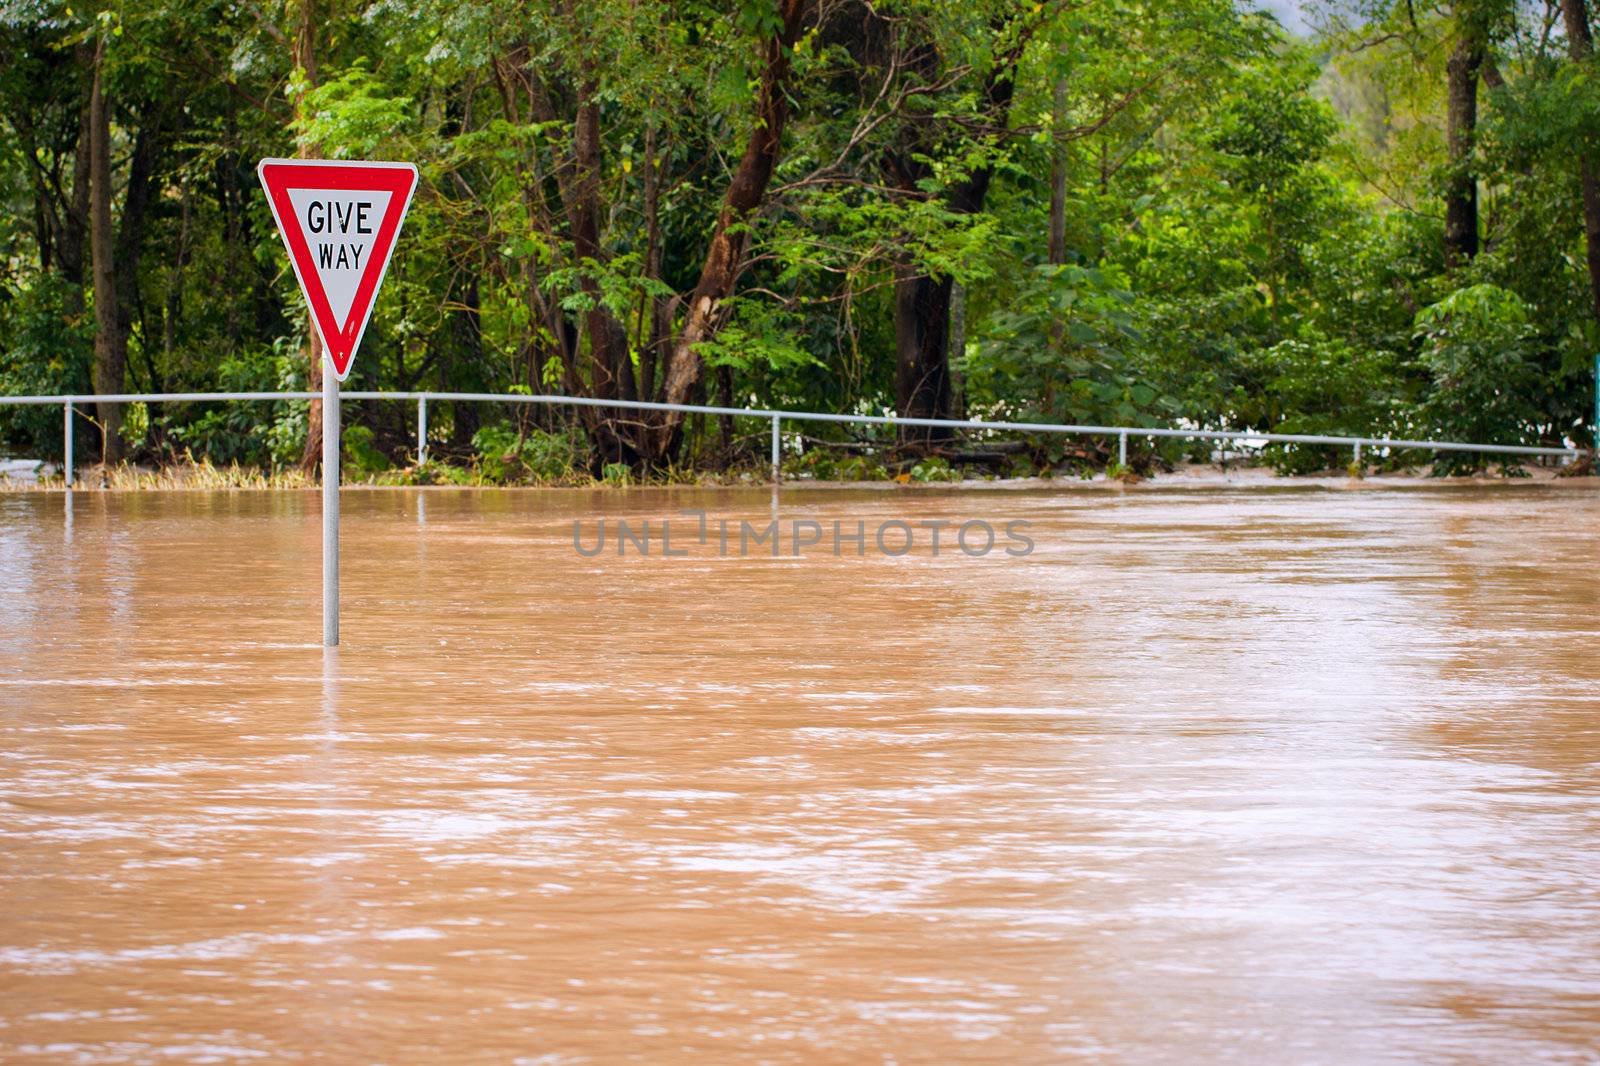 Very flooded road and give way sign in Queensland, Australia